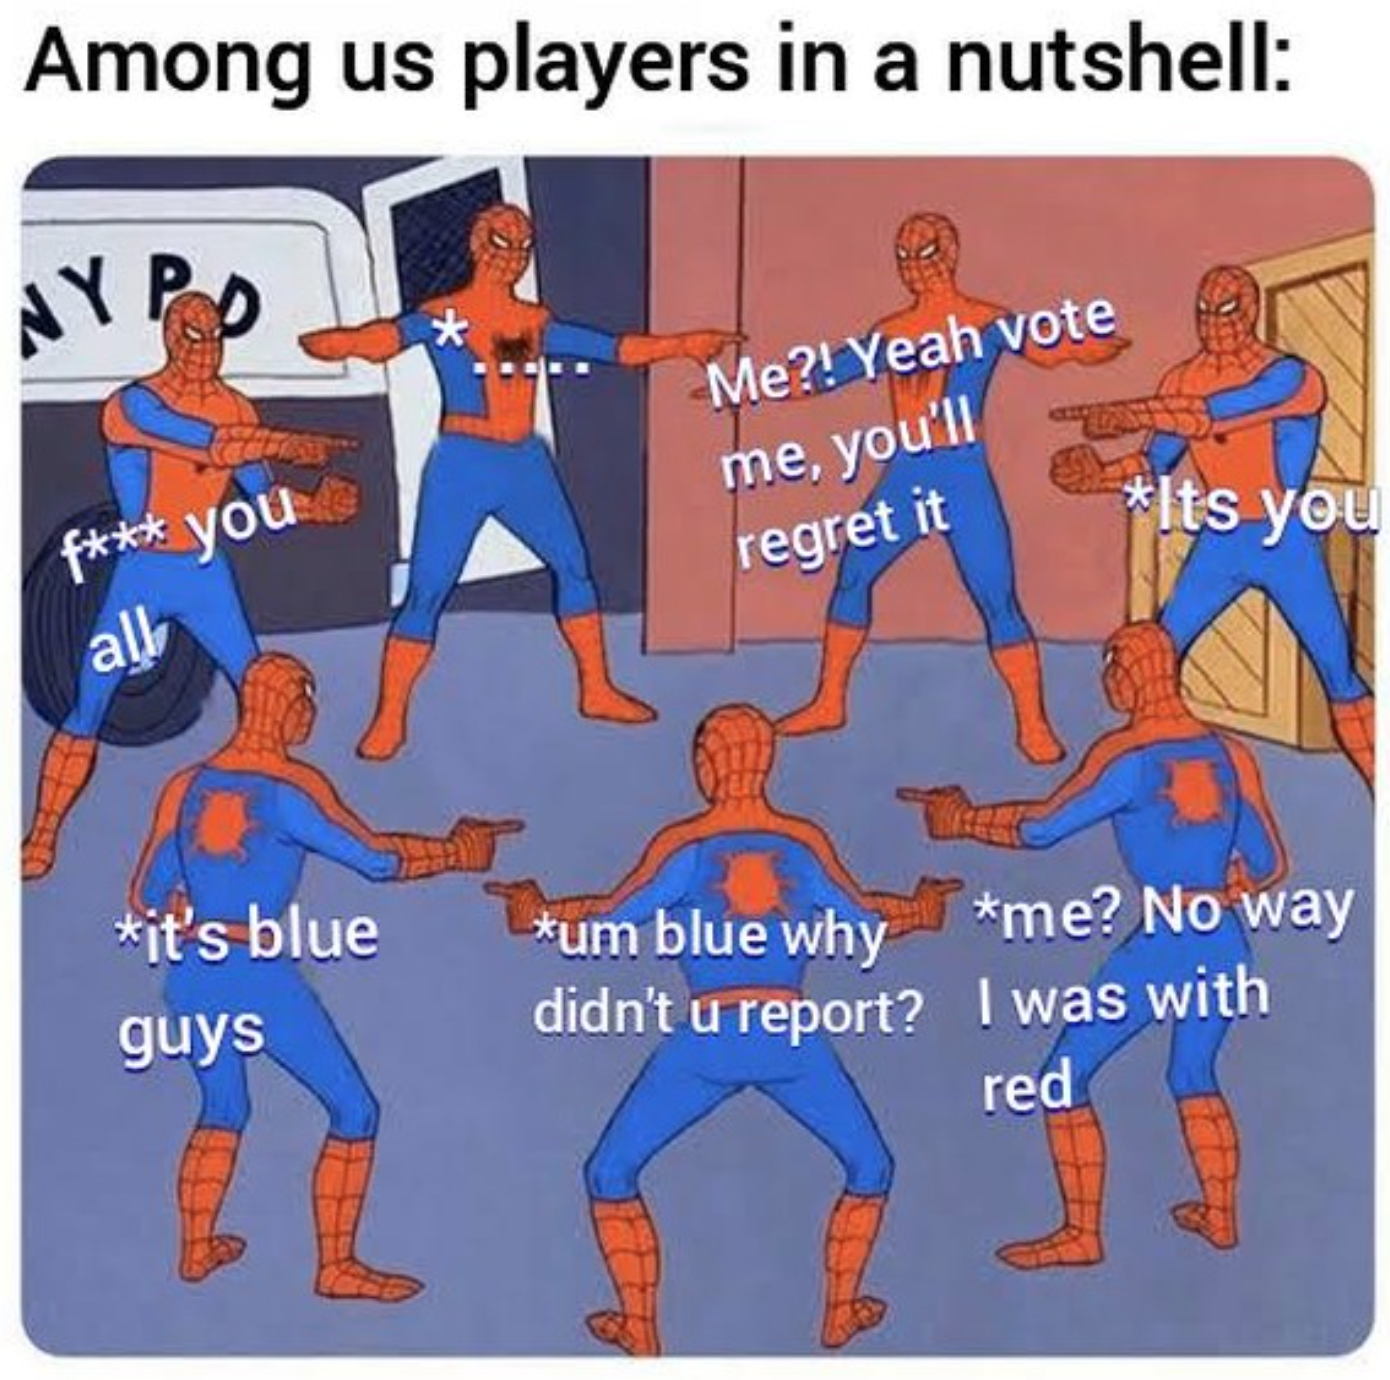 funny gaming memes  - Among us players in a nutshell Me?! Yeah vote me, you'll regret it Its you f you all it's blue um blue why me? No way didn't u report? I was with red guys